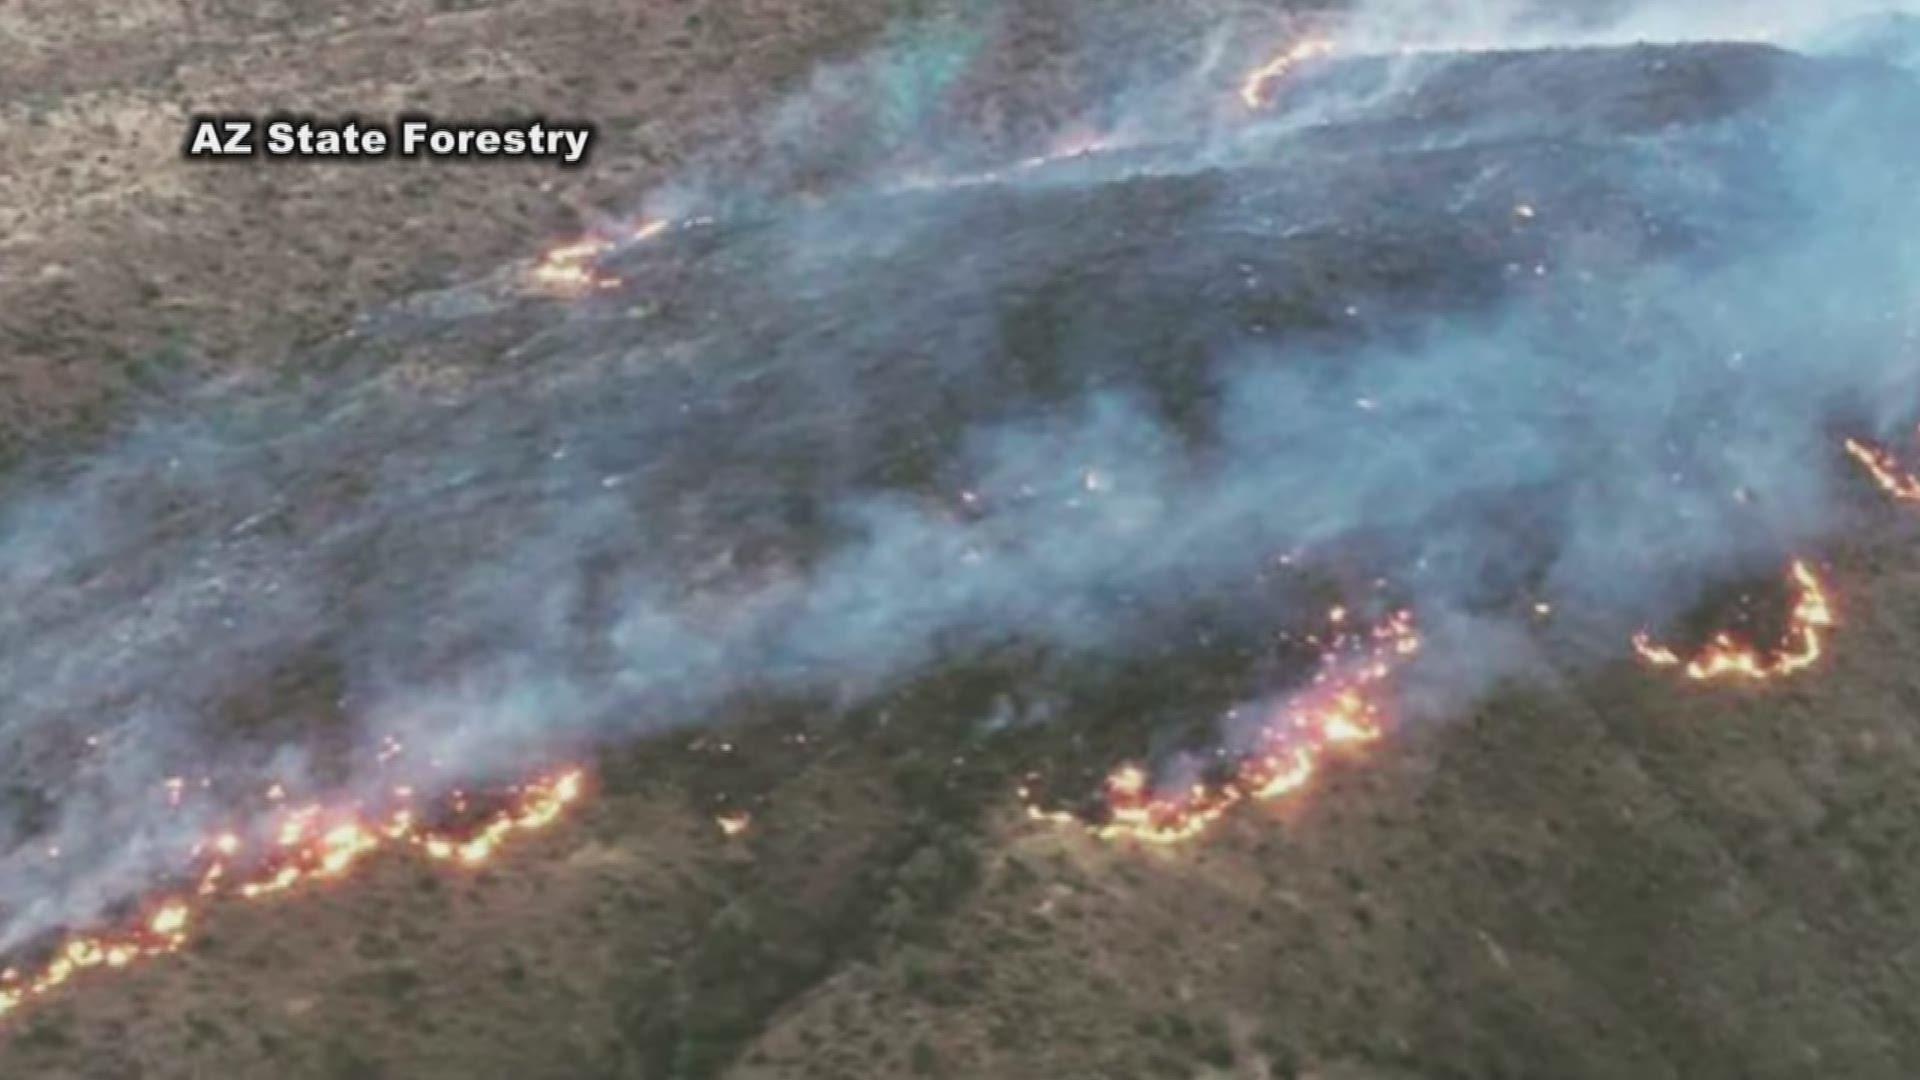 Firefighters are currently battling over 30 wildfires in Arizona.